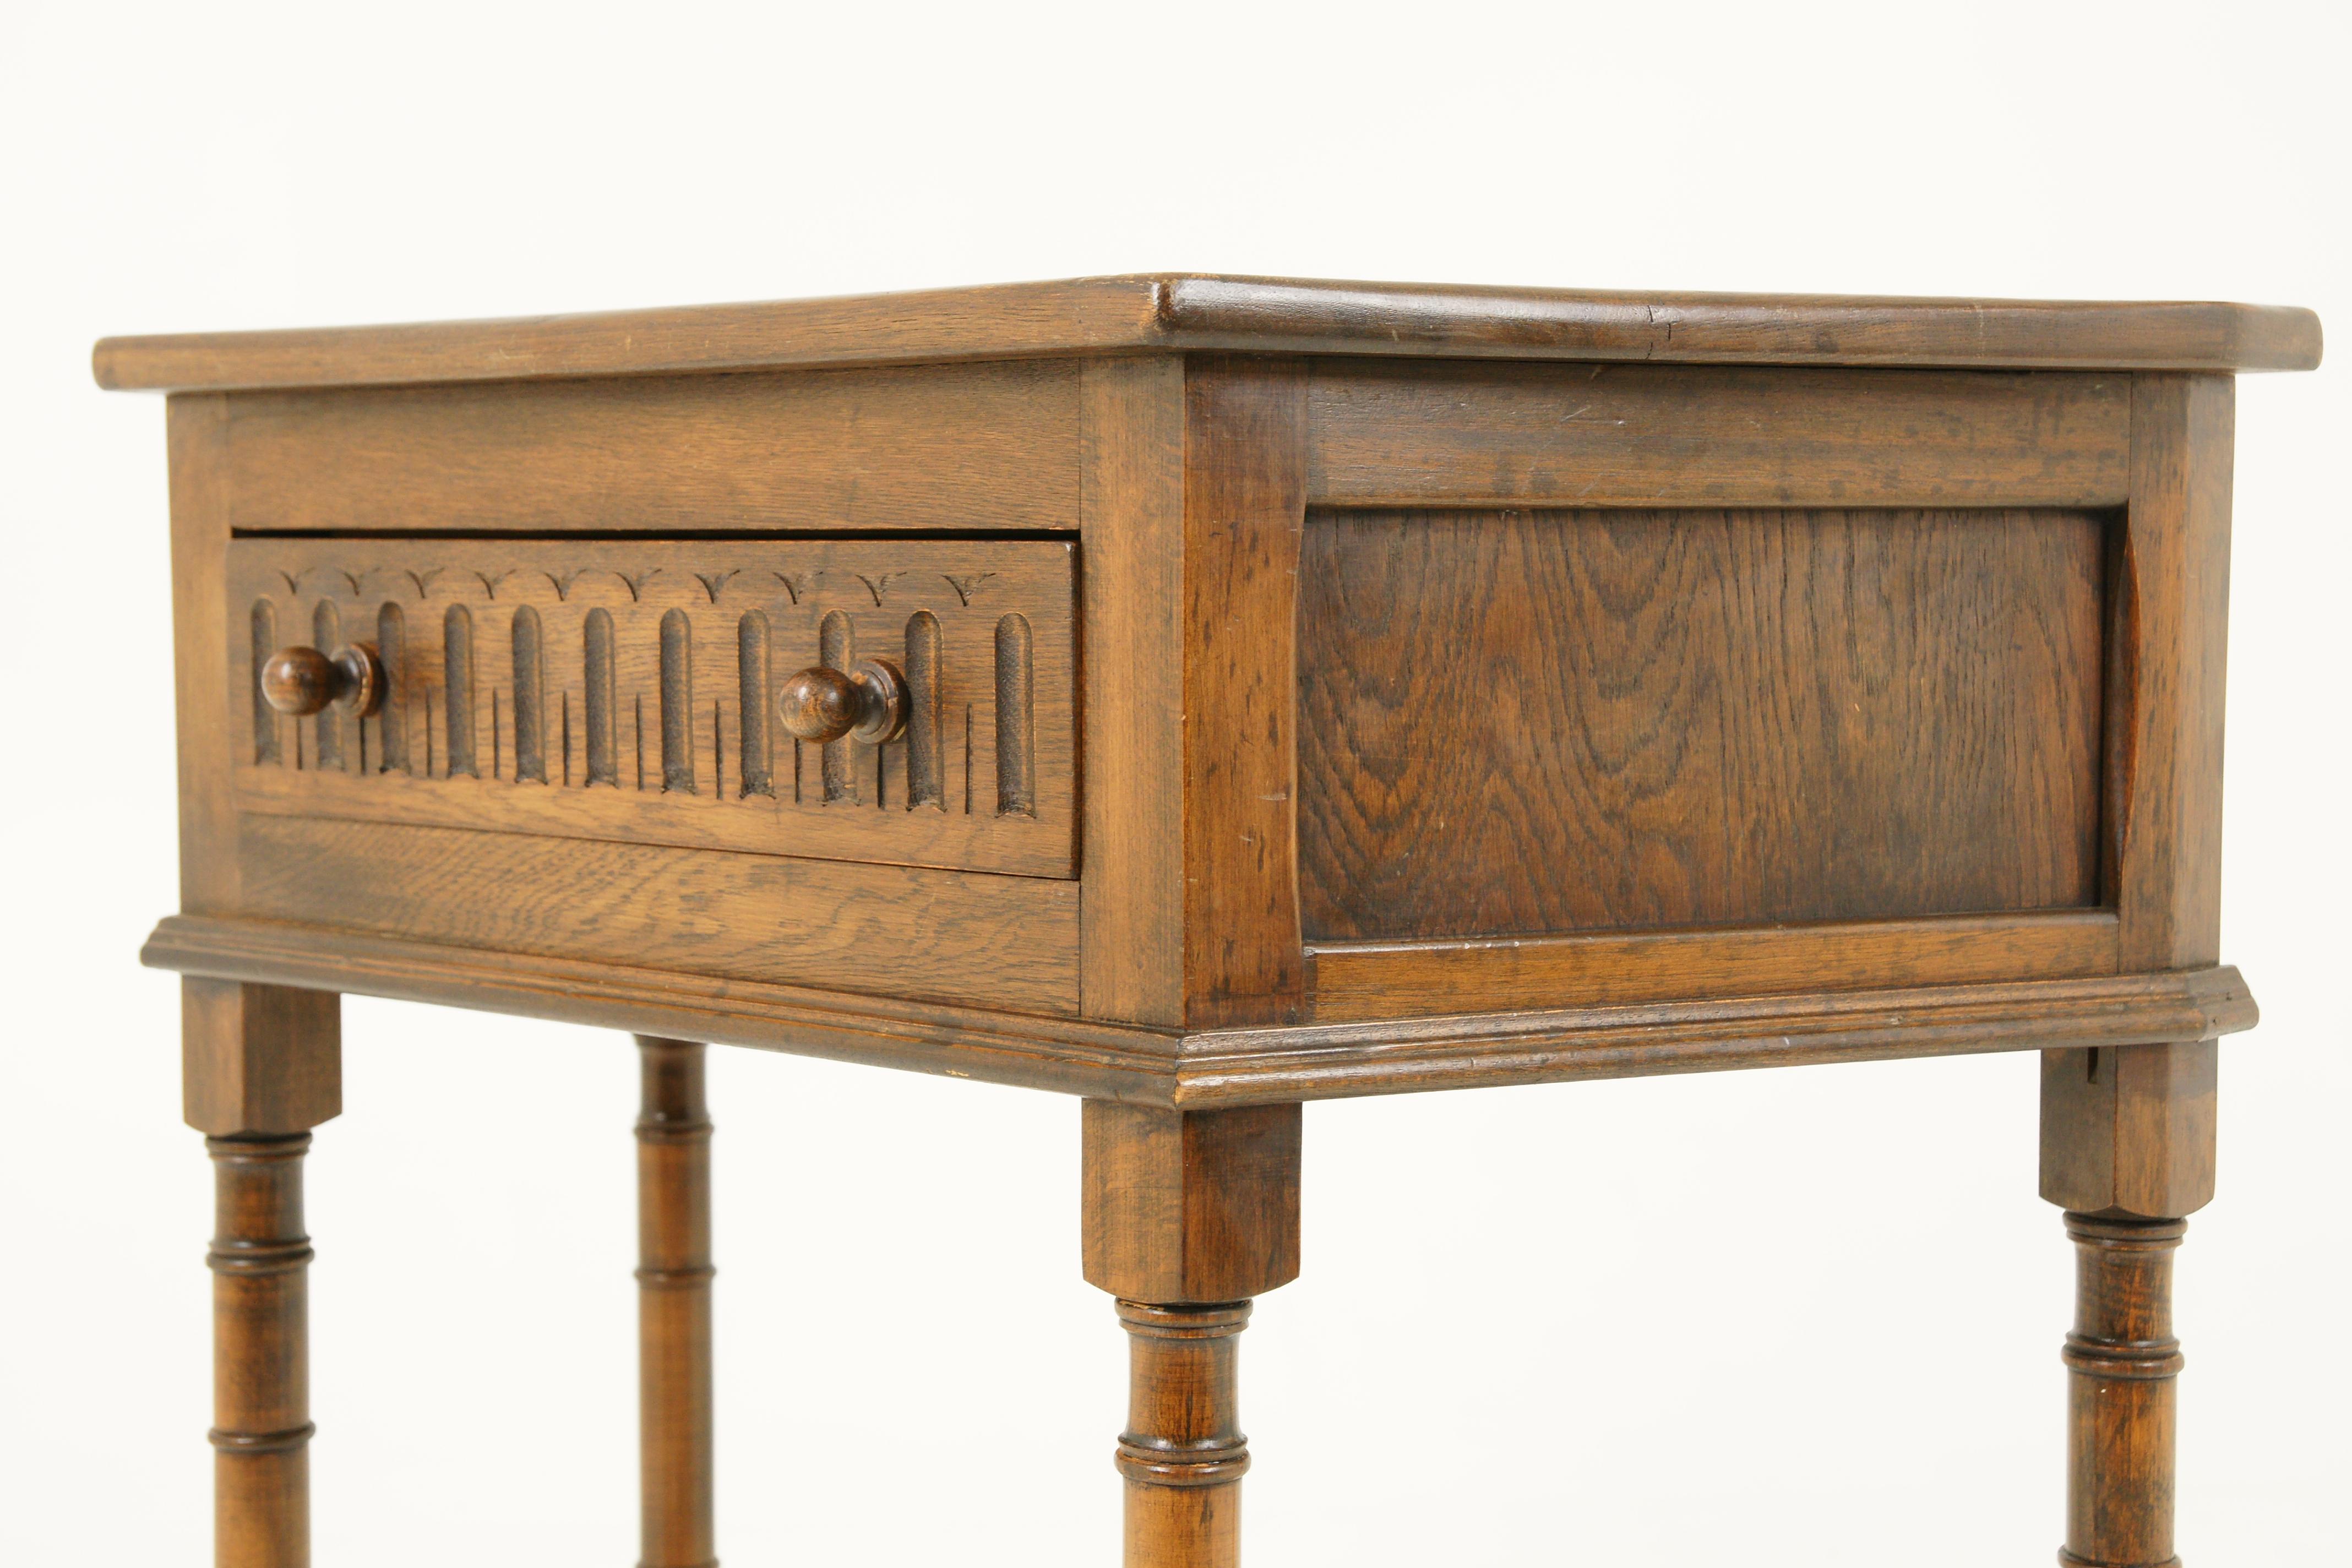 Hand-Crafted Antique Oak Table, Vintage Console Table or Hall Table, Scotland 1940, B1737